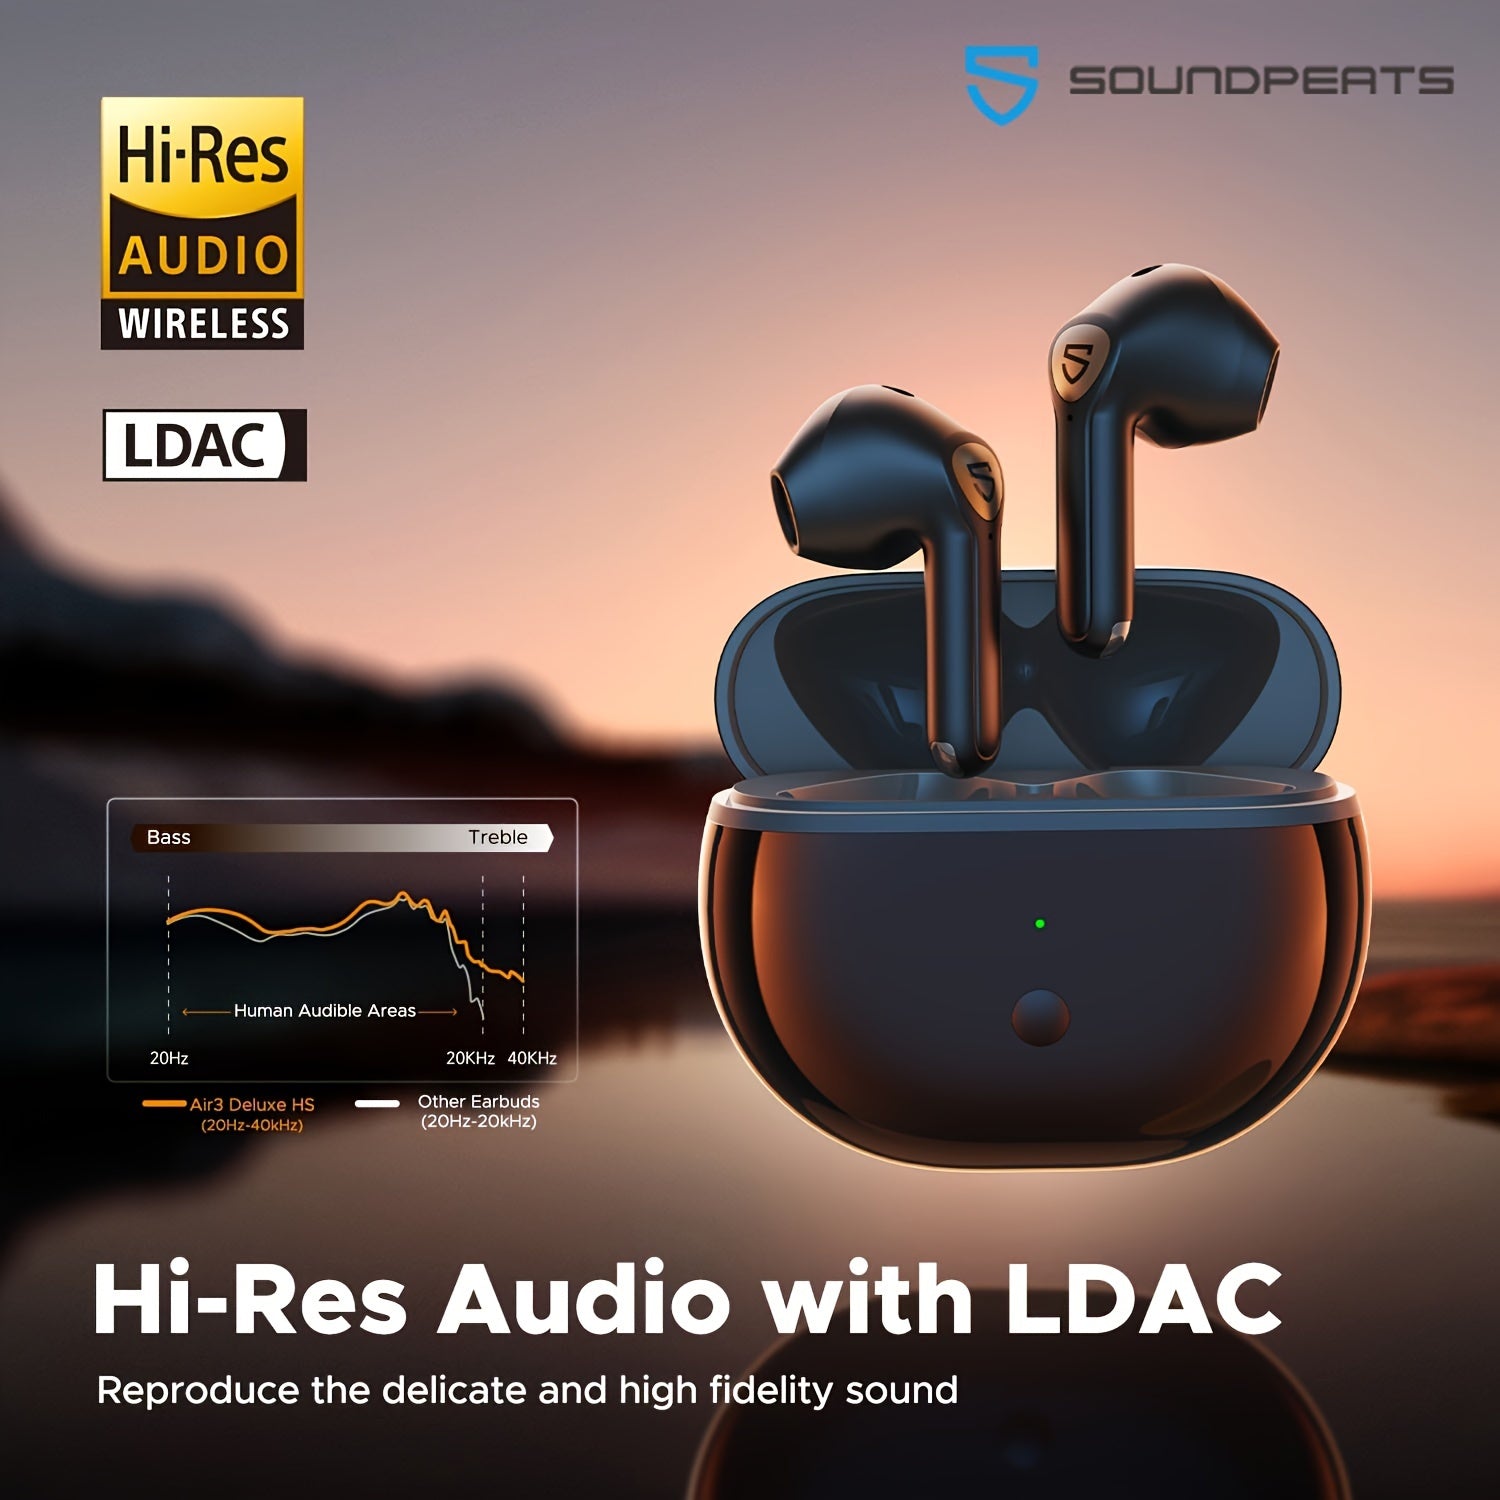 SOUNDPEATS Wireless Earbuds Air3 Deluxe HS With Hi-Res Audio Certification And LDAC Codec, Wireless 5.2 Earphones With 4 Mics And ENC For Calls, 14.2mm Driver, 60ms Low Latency Game Mode